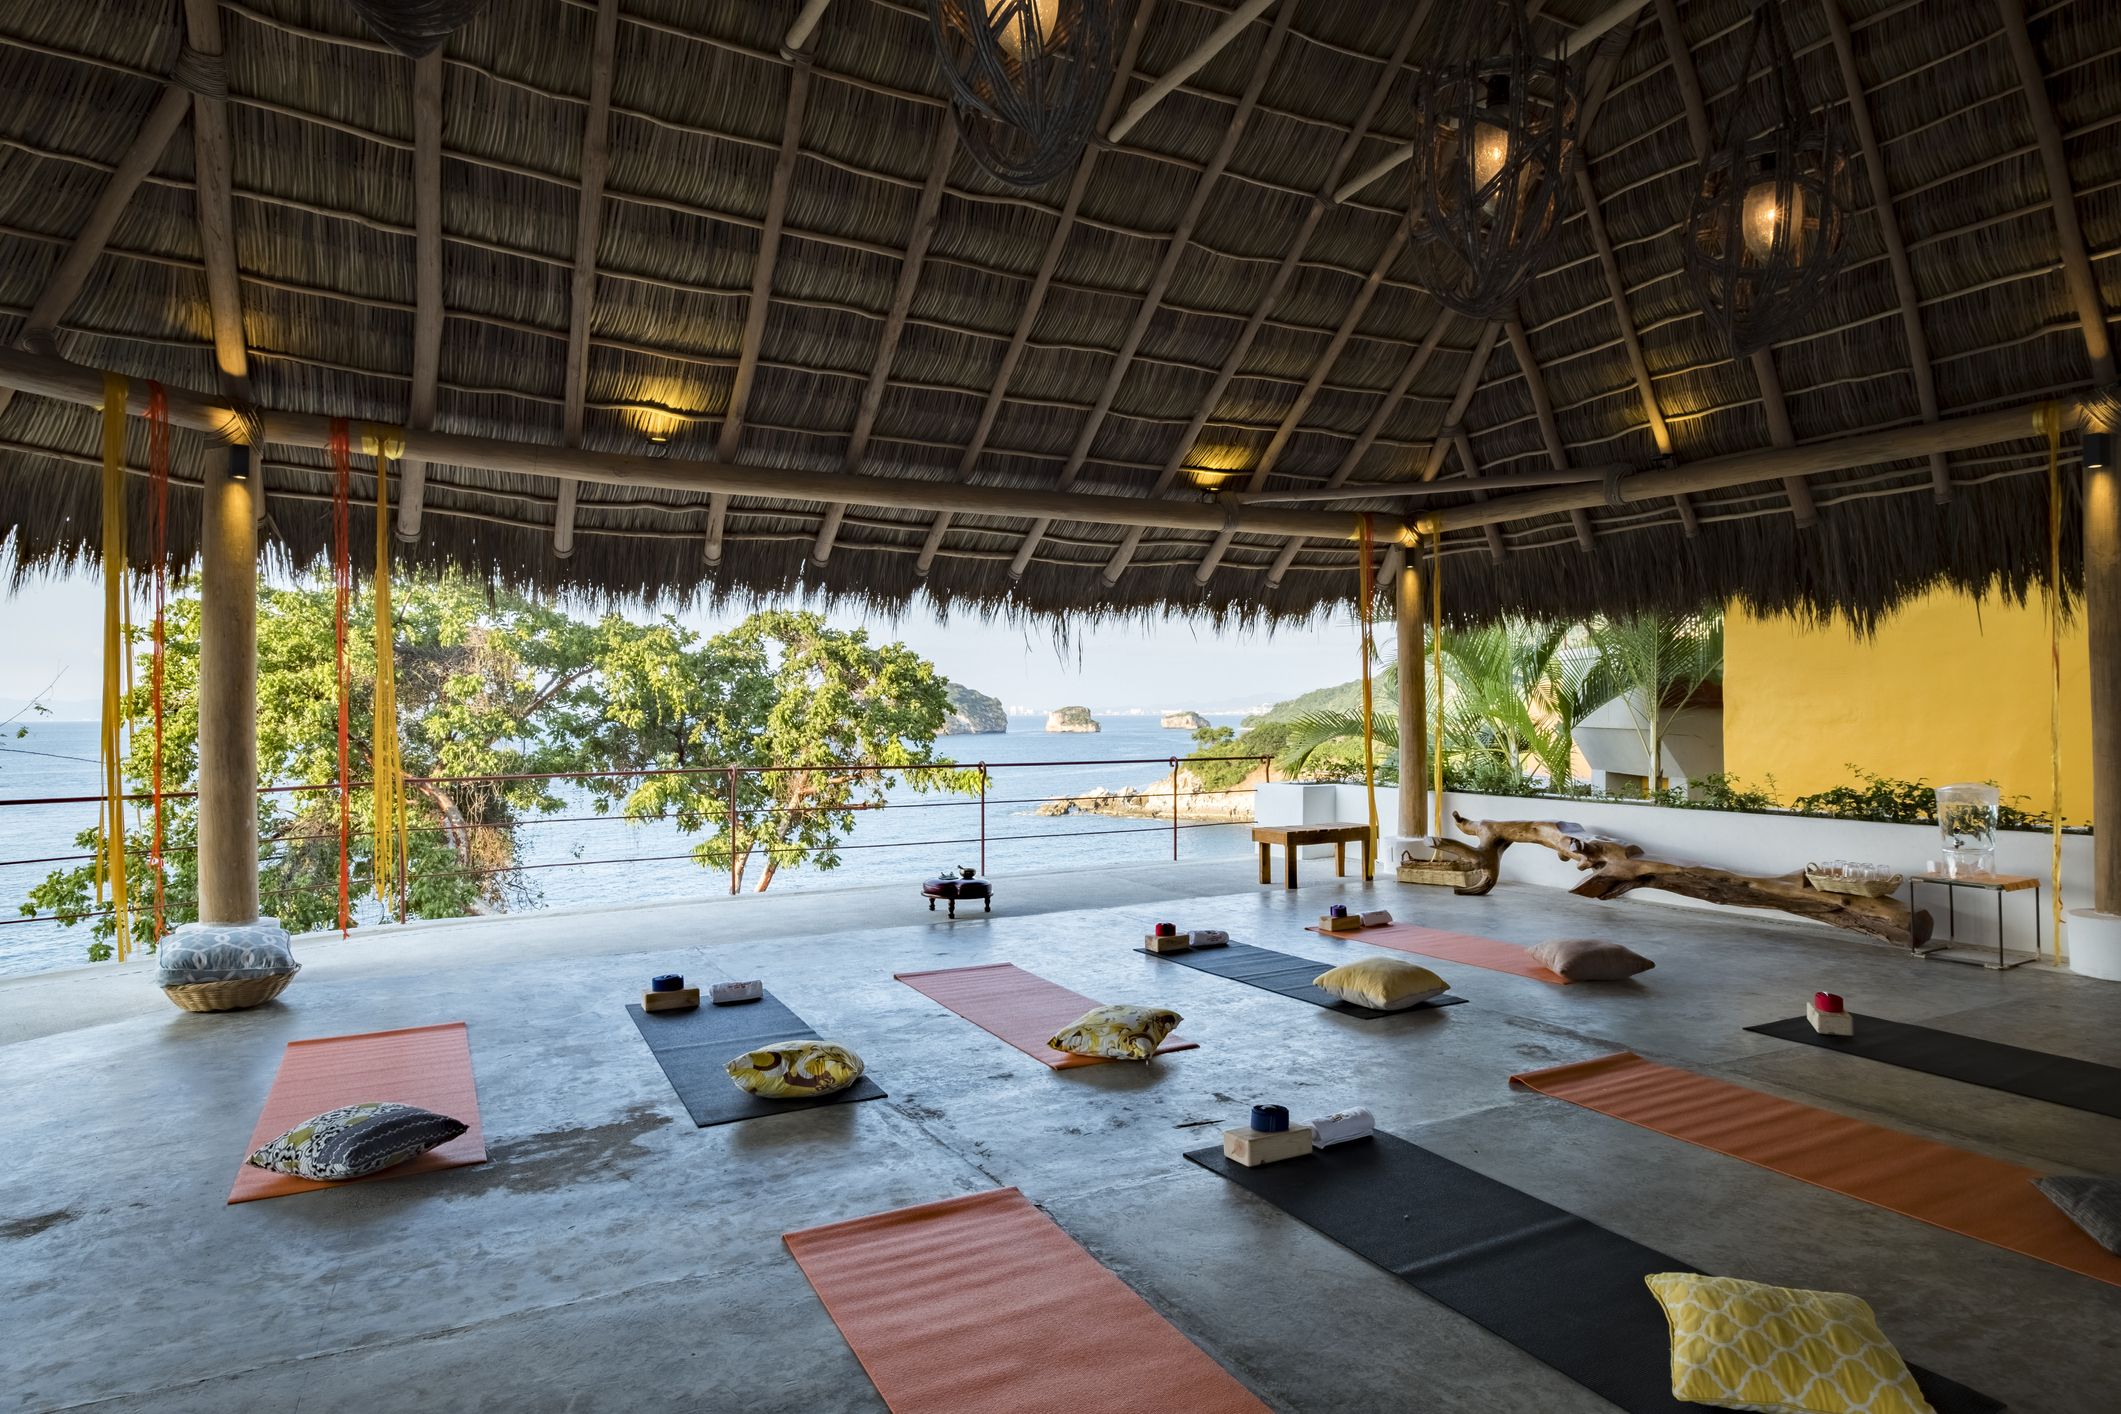 Weekend Retreat: Wise Women Yoga and Soul Soothing - The Lavender Room